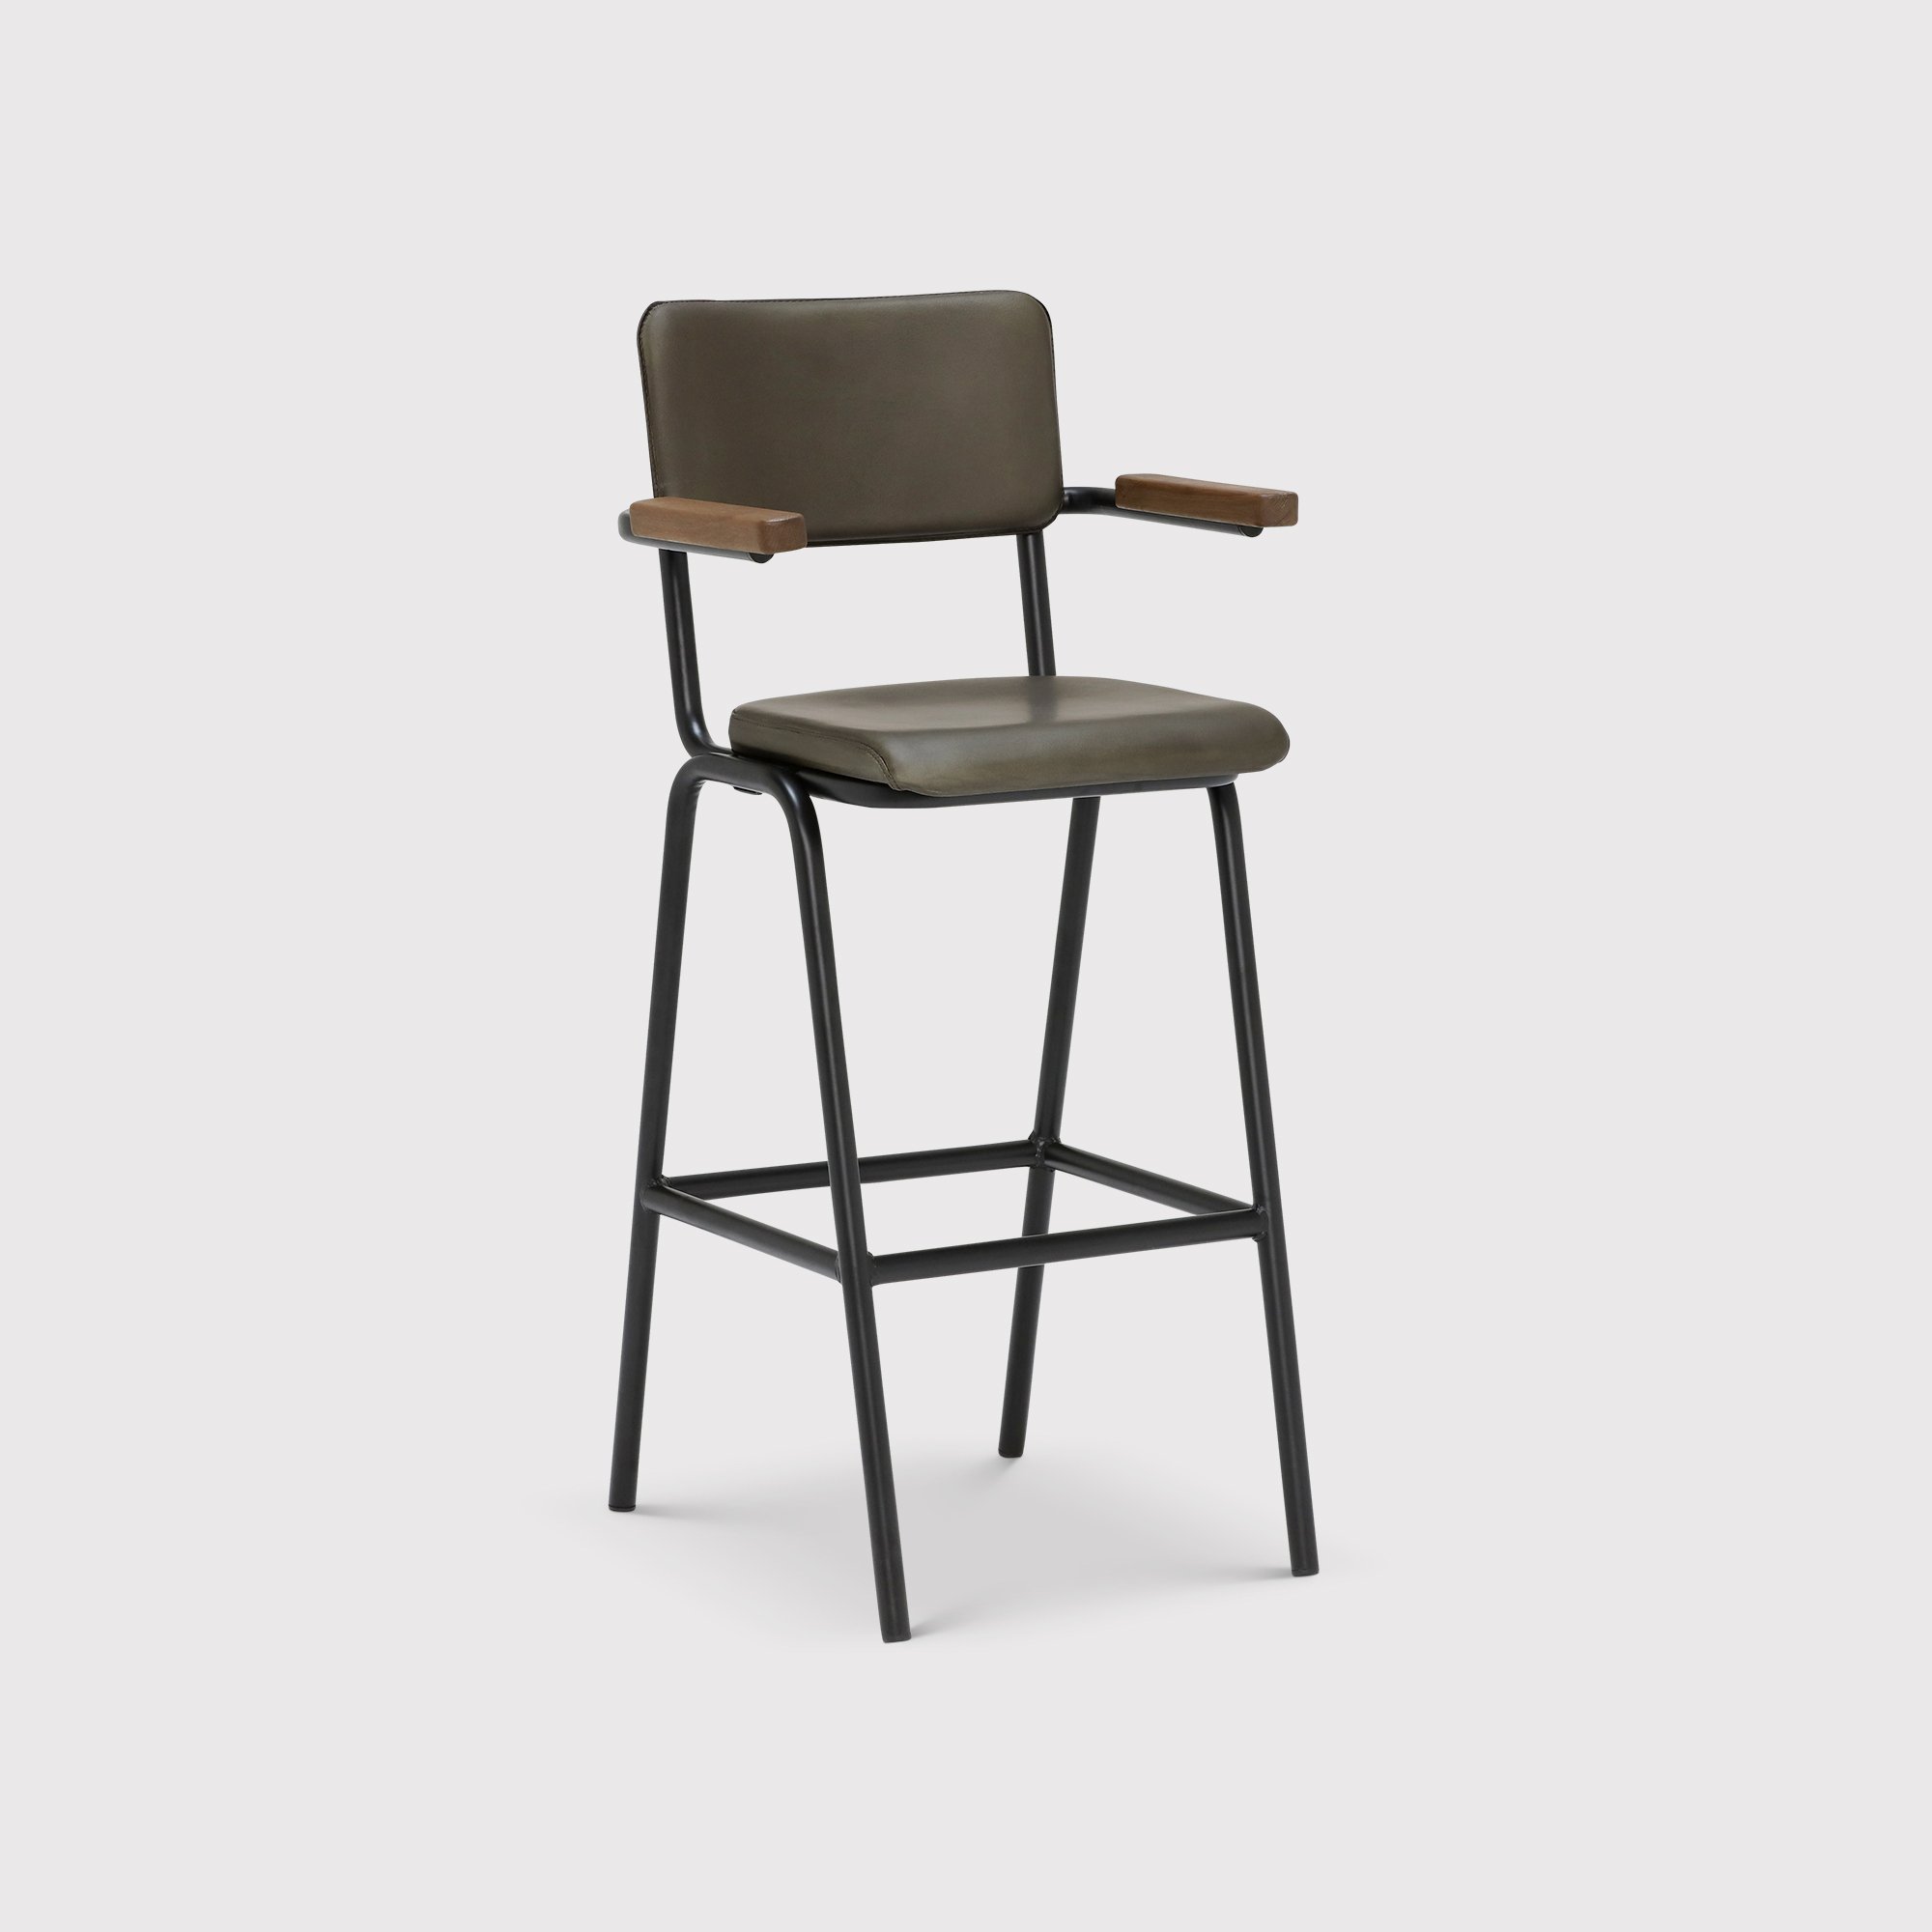 Pure Furniture Twyford Barstool With Arms With Matt Black Frame, Green Leather | Barker & Stonehouse